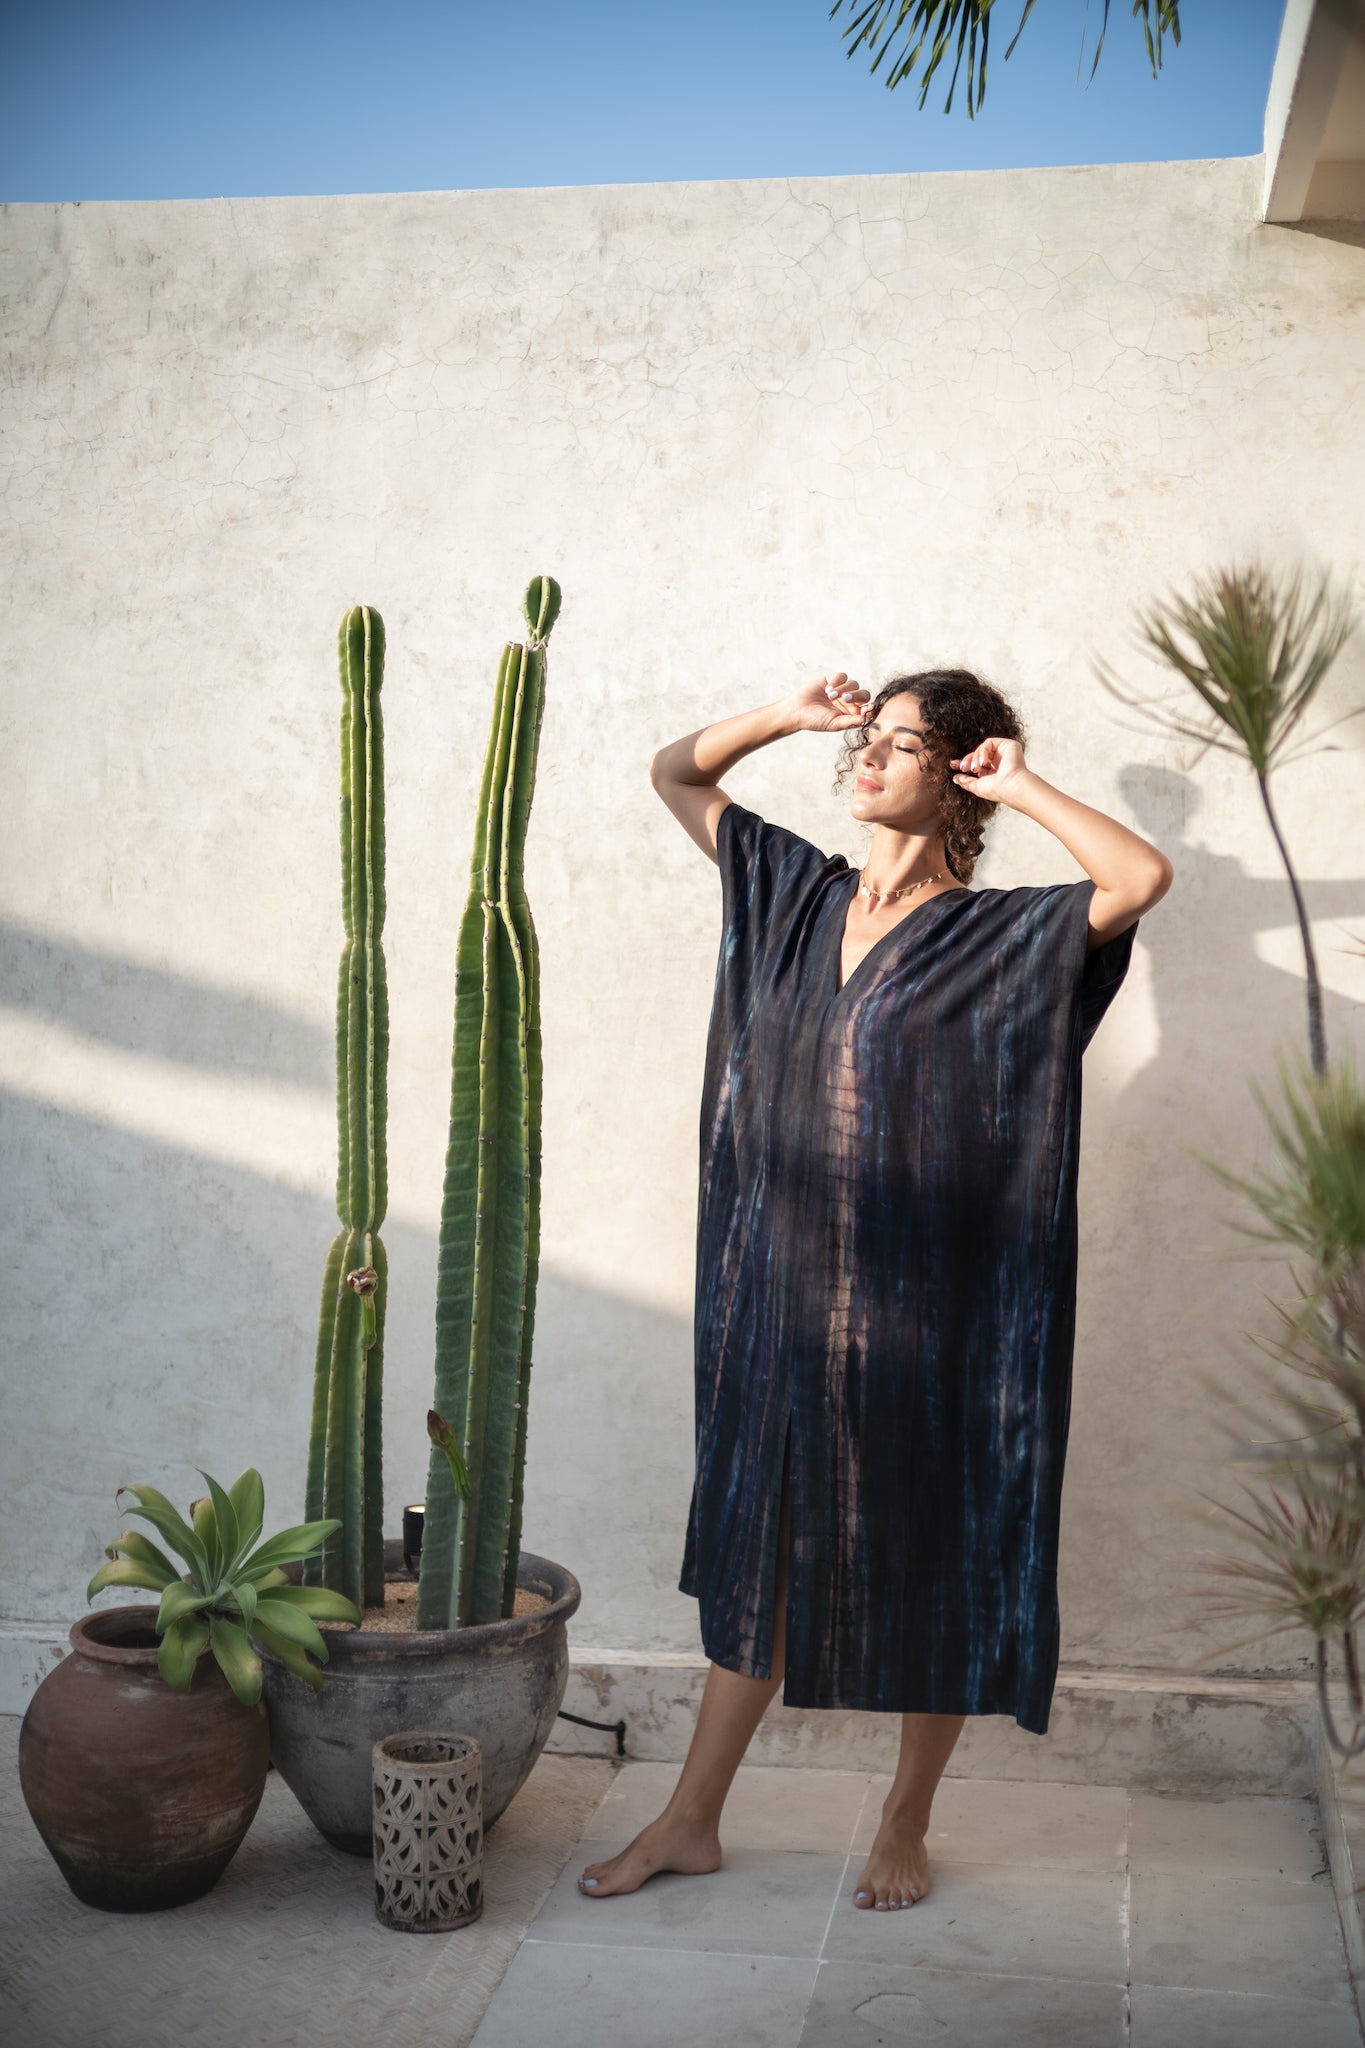 Alaia Caftan Dress with Pockets in Deep Navy